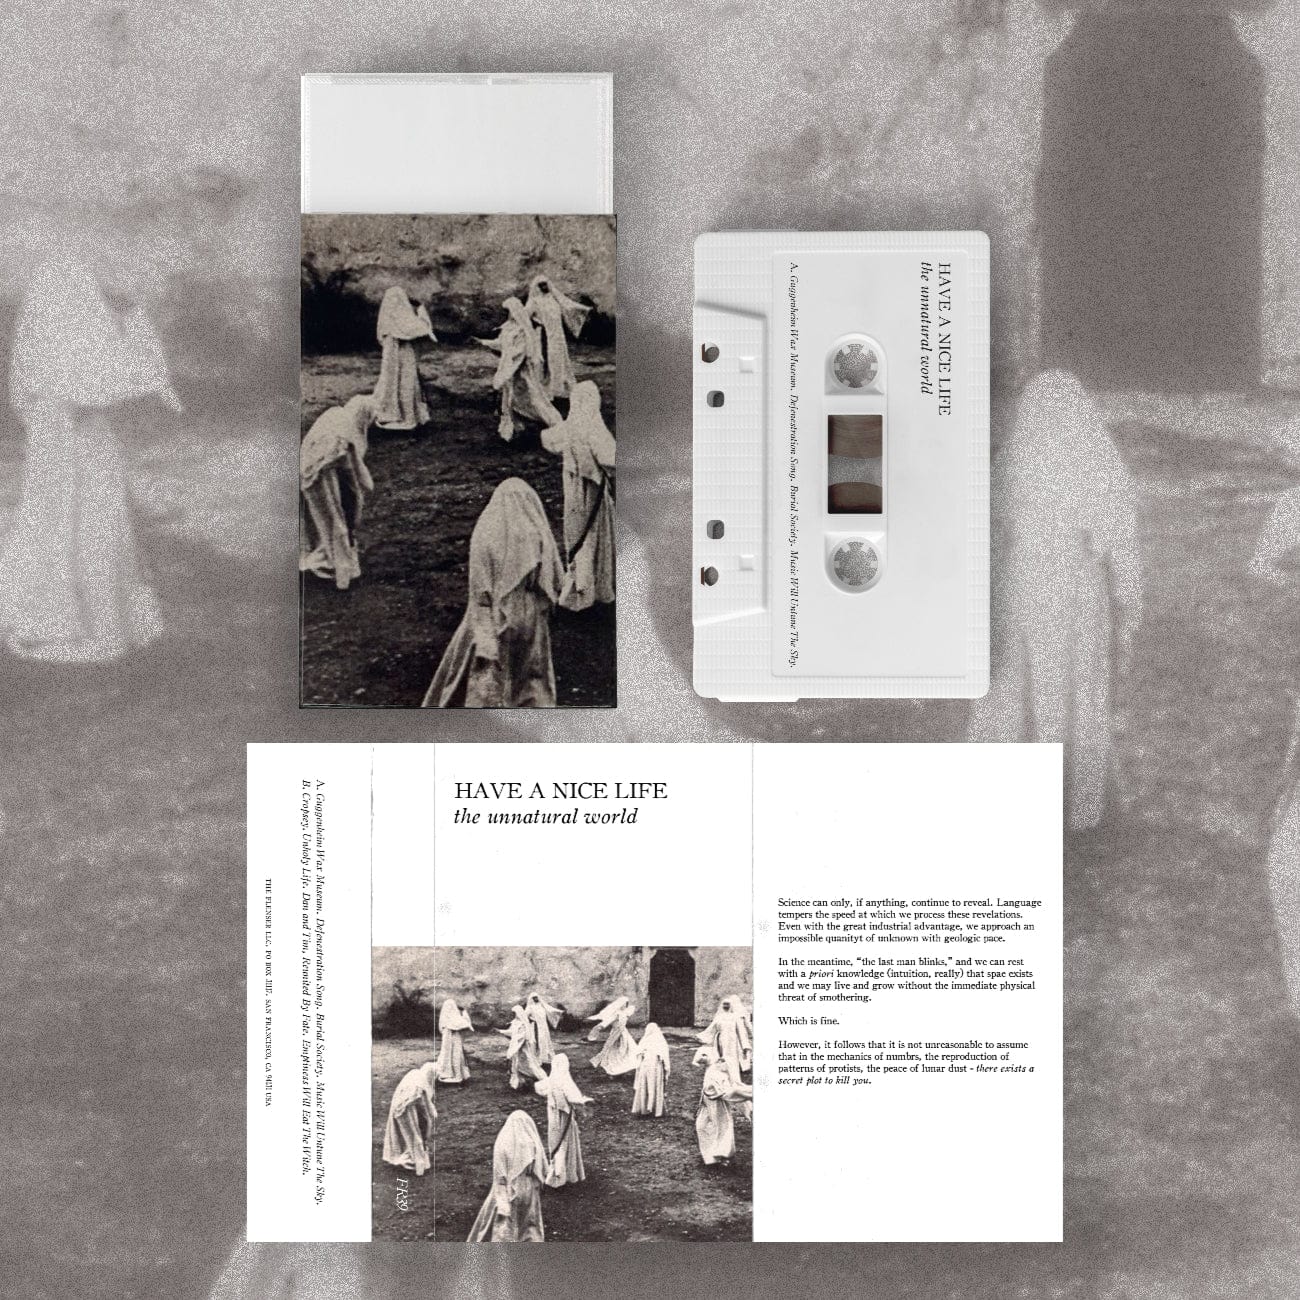 The Flenser Tapes Have a Nice Life "The Unnatural World" Tape